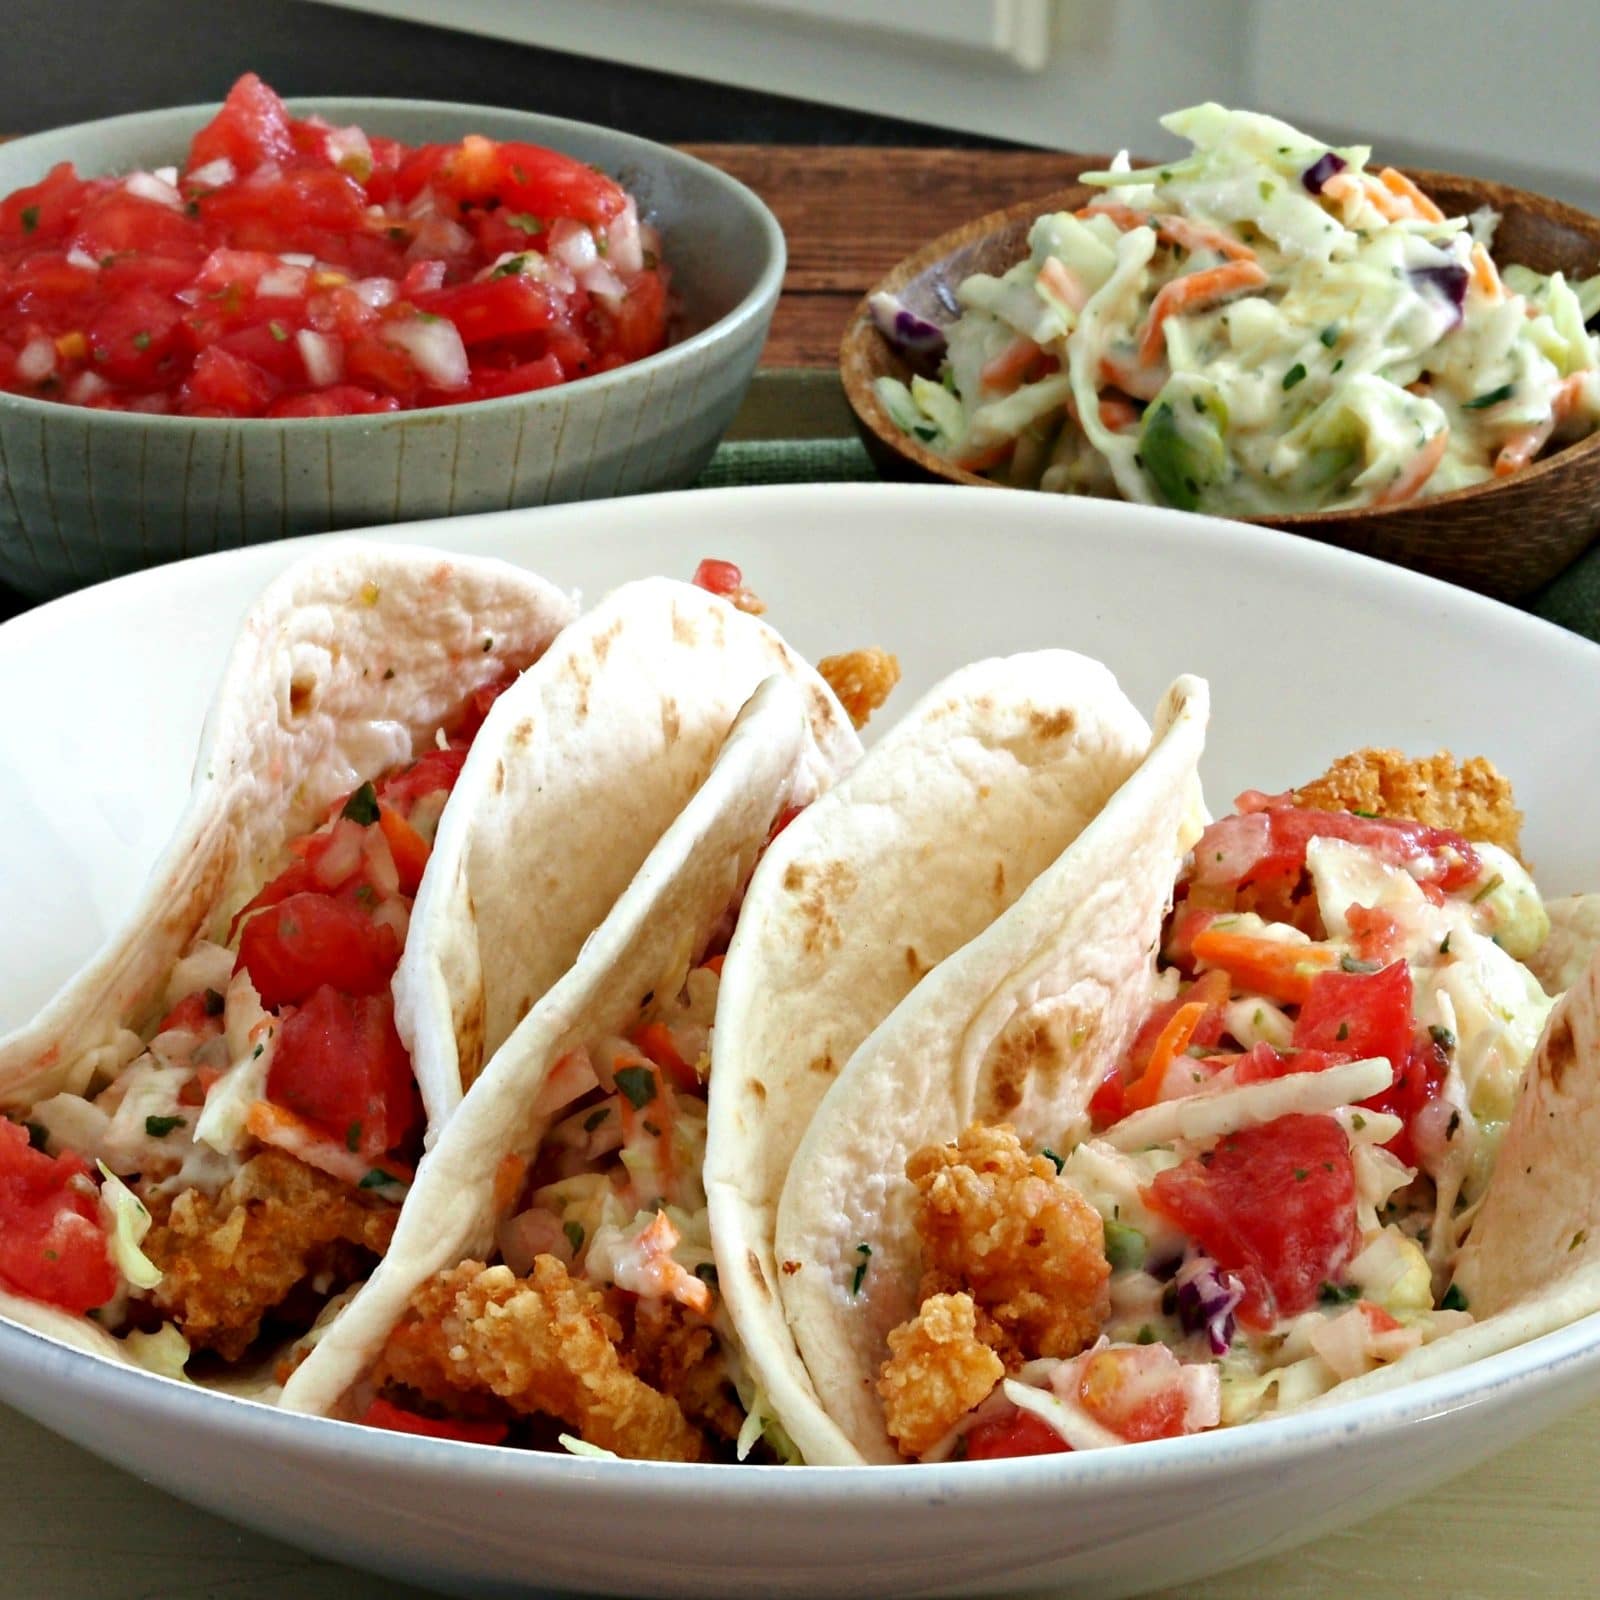 Popcorn Shrimp Tacos with Coleslaw & Pico de Gallo is packed with flavor and textures.  A dish you will make again and again.  